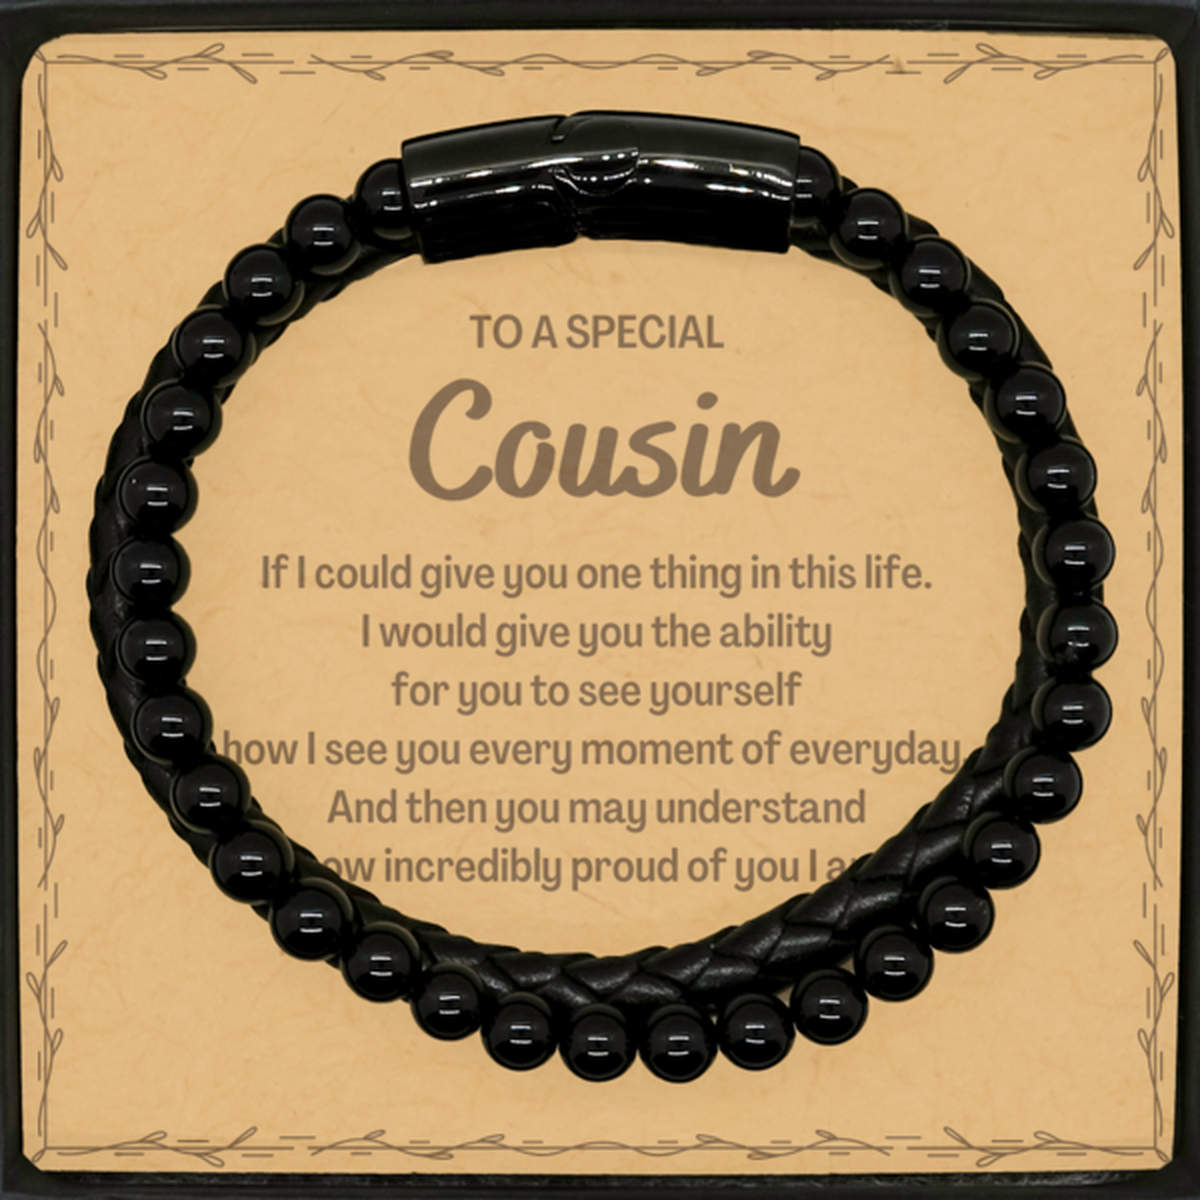 To My Cousin Stone Leather Bracelets, Gifts For Cousin Message Card, Inspirational Gifts for Christmas Birthday, Epic Gifts for Cousin To A Special Cousin how incredibly proud of you I am